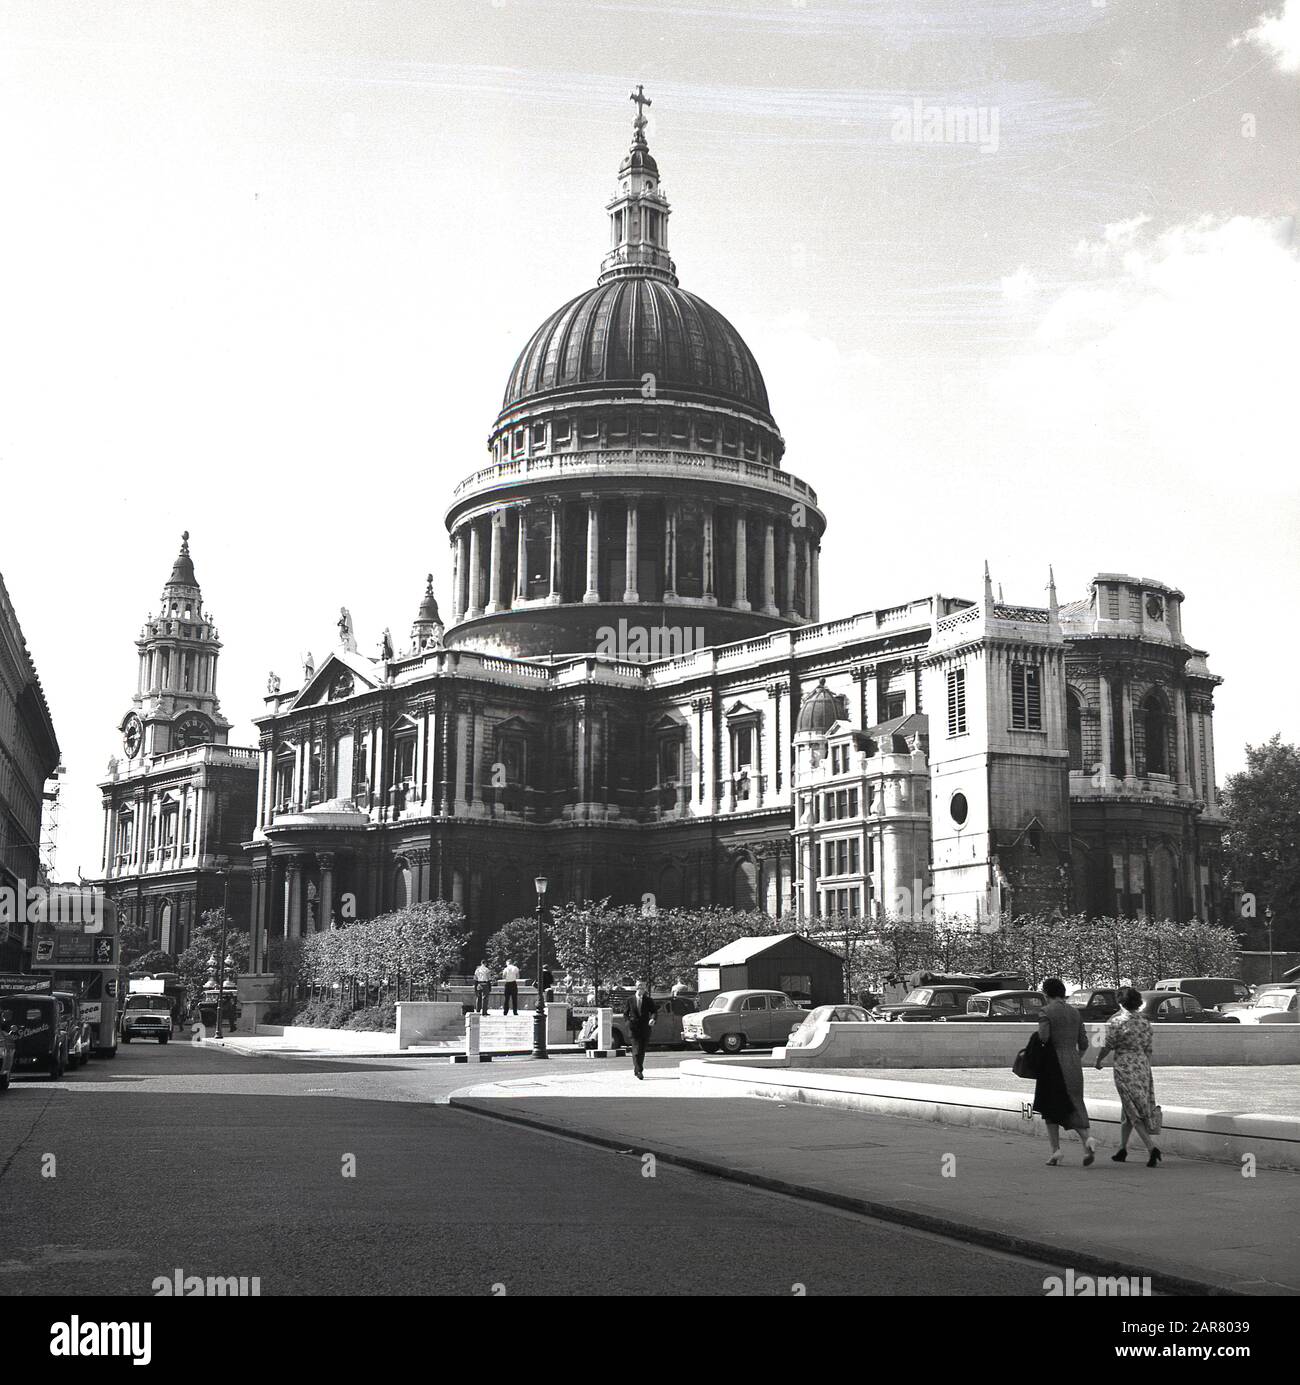 1950s, historical, post-war London and a view of St Paul's Cathedral, with its famous dome, the seat of the Bishop of London, England, UK. Designed by Christopher Wren and built in the English Baroque style of architecture, the church is located in Ludgate Hill, the highest point of the City of London. Stock Photo